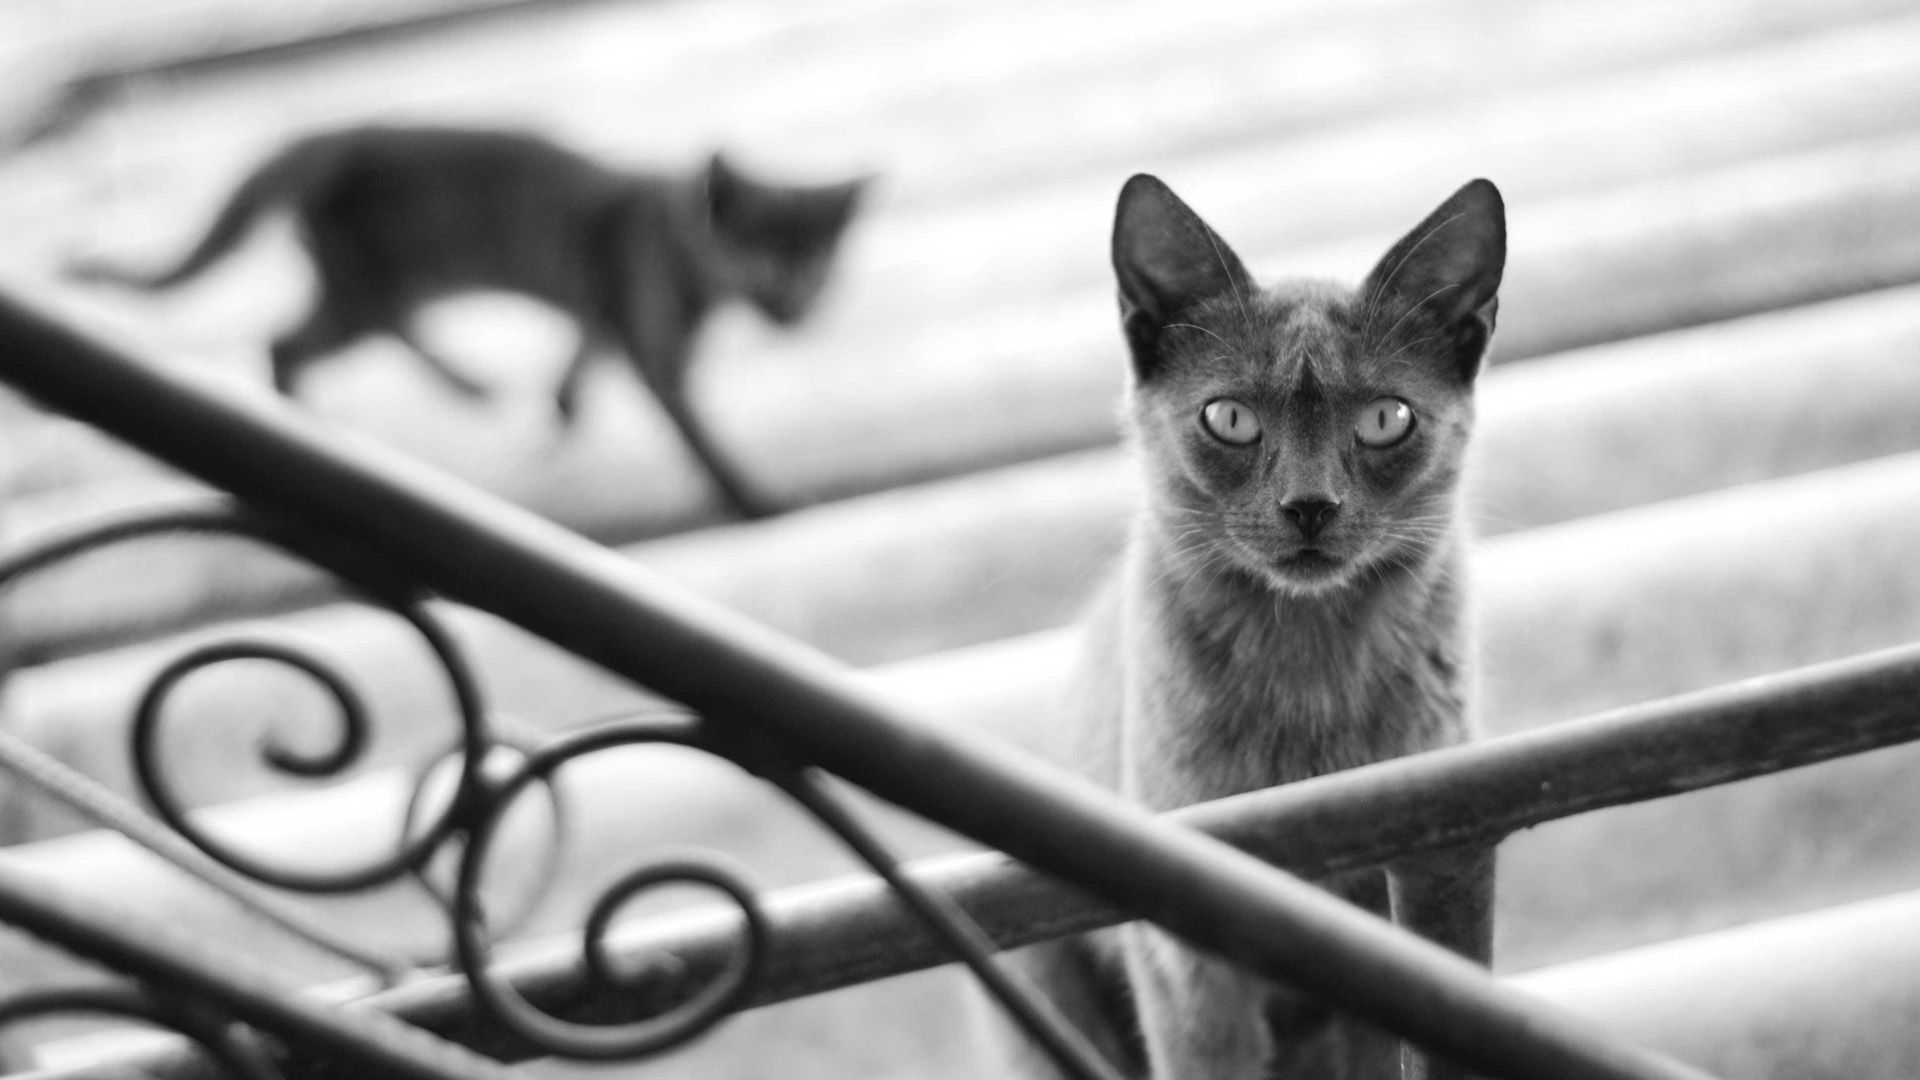 black and white, animals, silhouette, cat, kitty, kitten, blur, smooth, shadow, grey, steps, railings, handrail